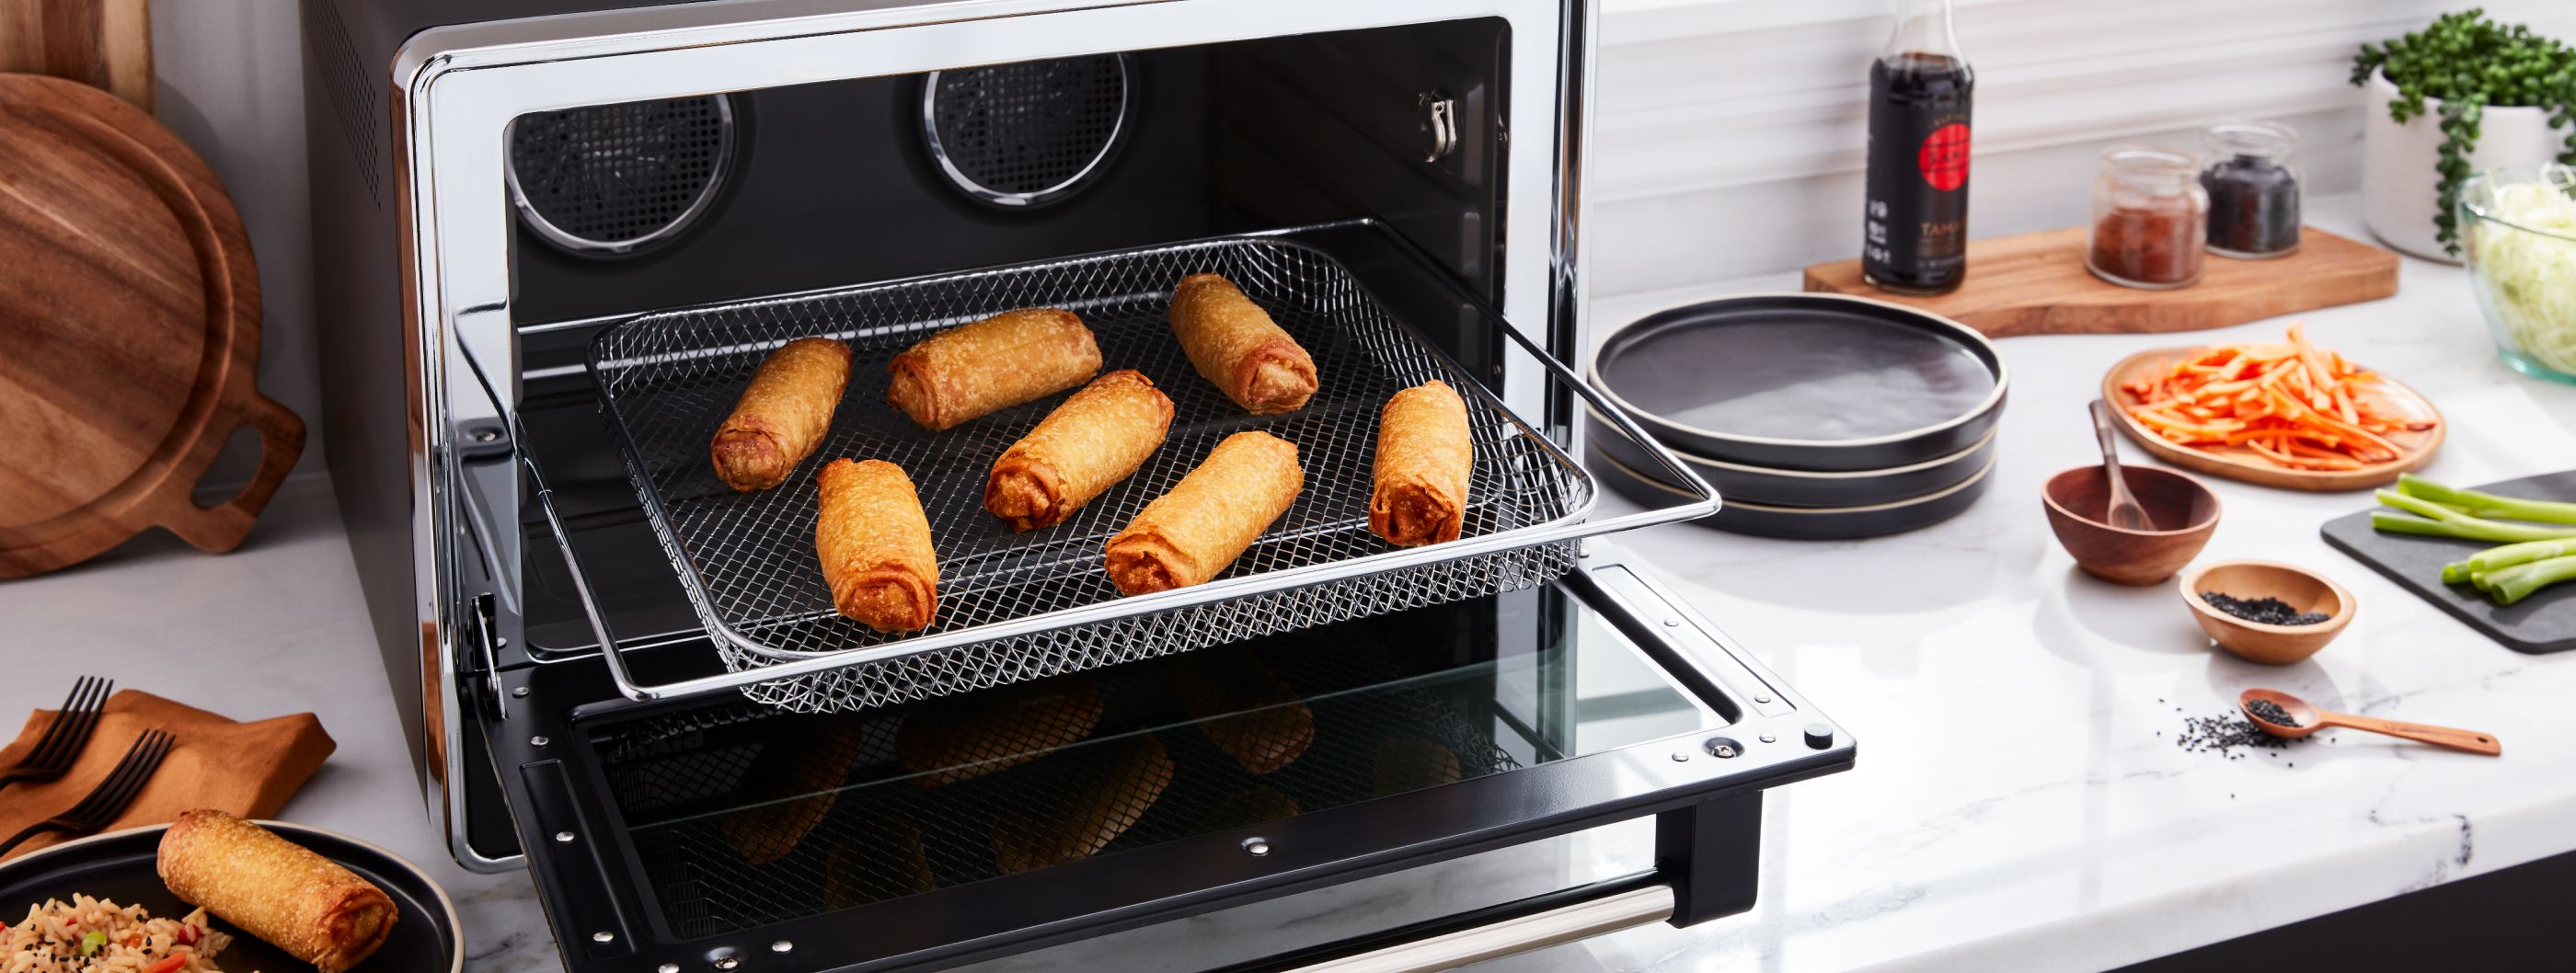 Egg rolls being removed from a toaster oven